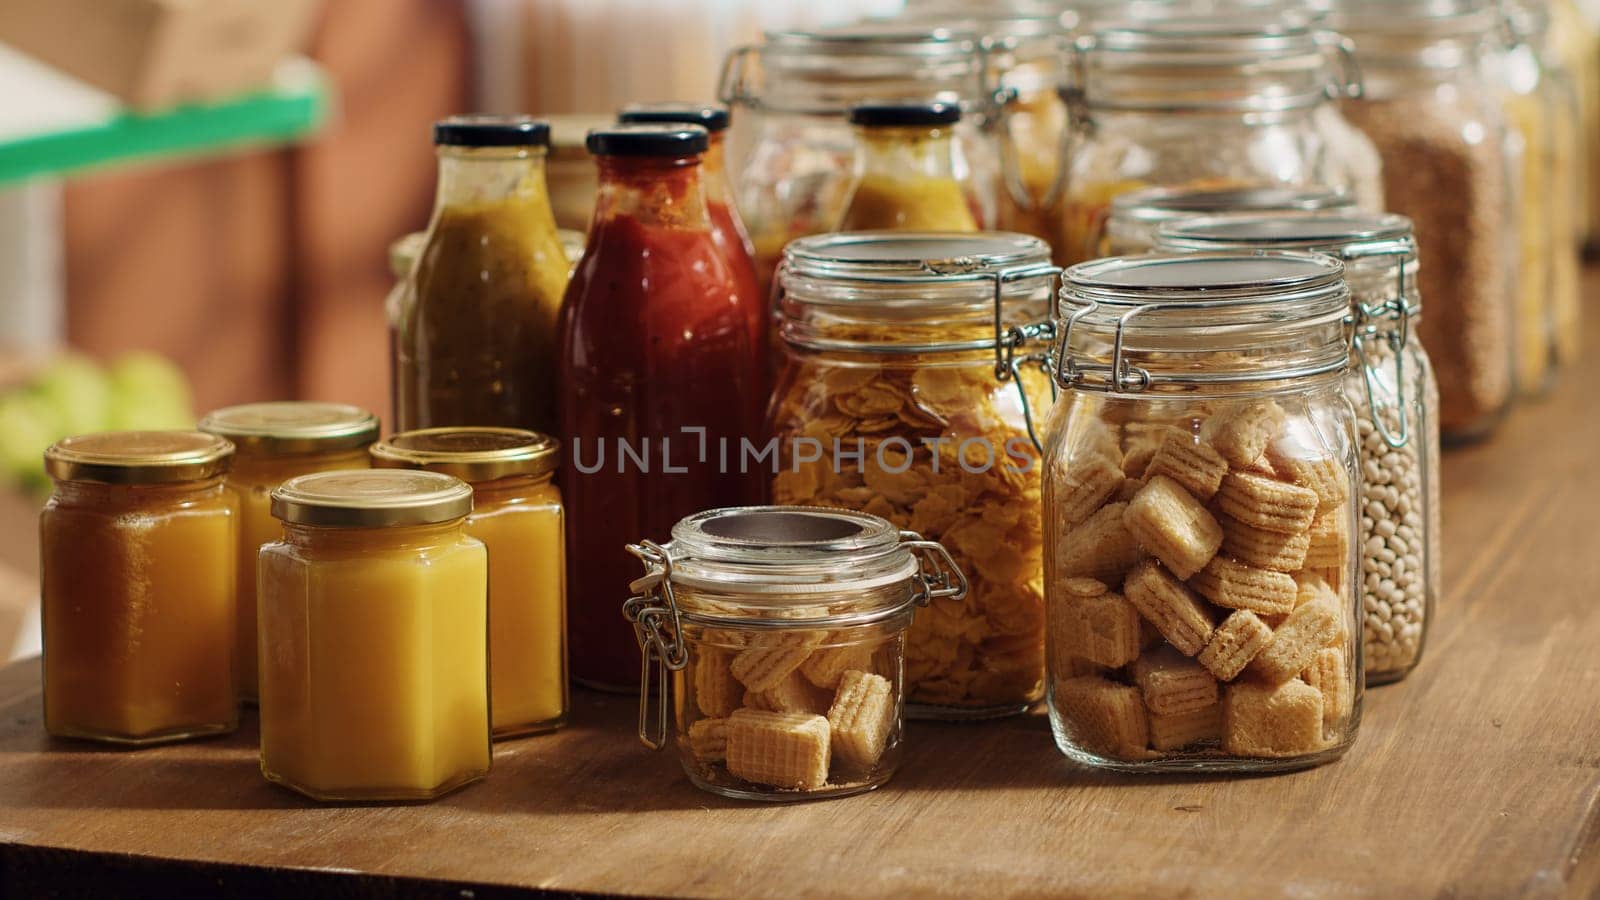 Close up on bulk food items in reusable glass jars used by environmentally friendly supermarket to lower climate impact. Local shop pantry staples in biodegradable nonpolluting packaging, panning shot